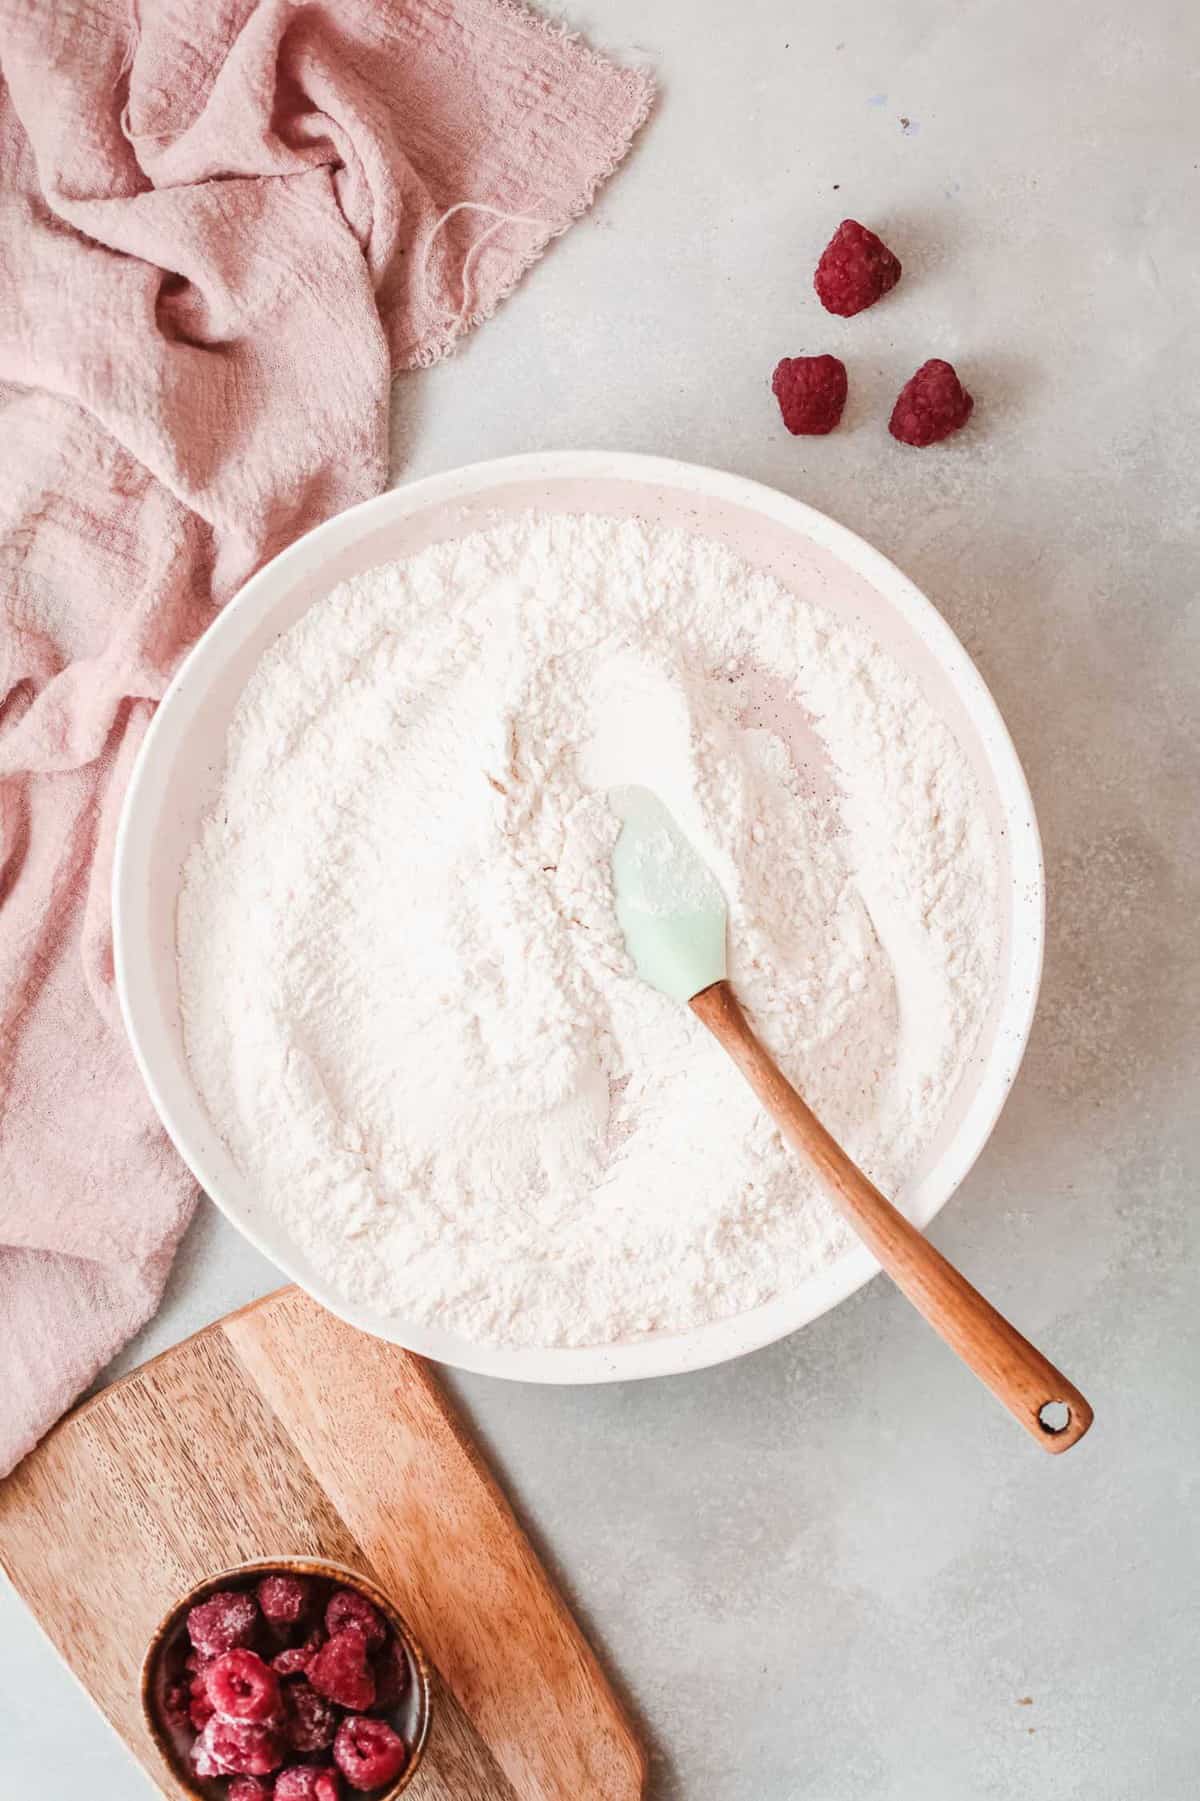 Dry ingredients in a pink bowl.